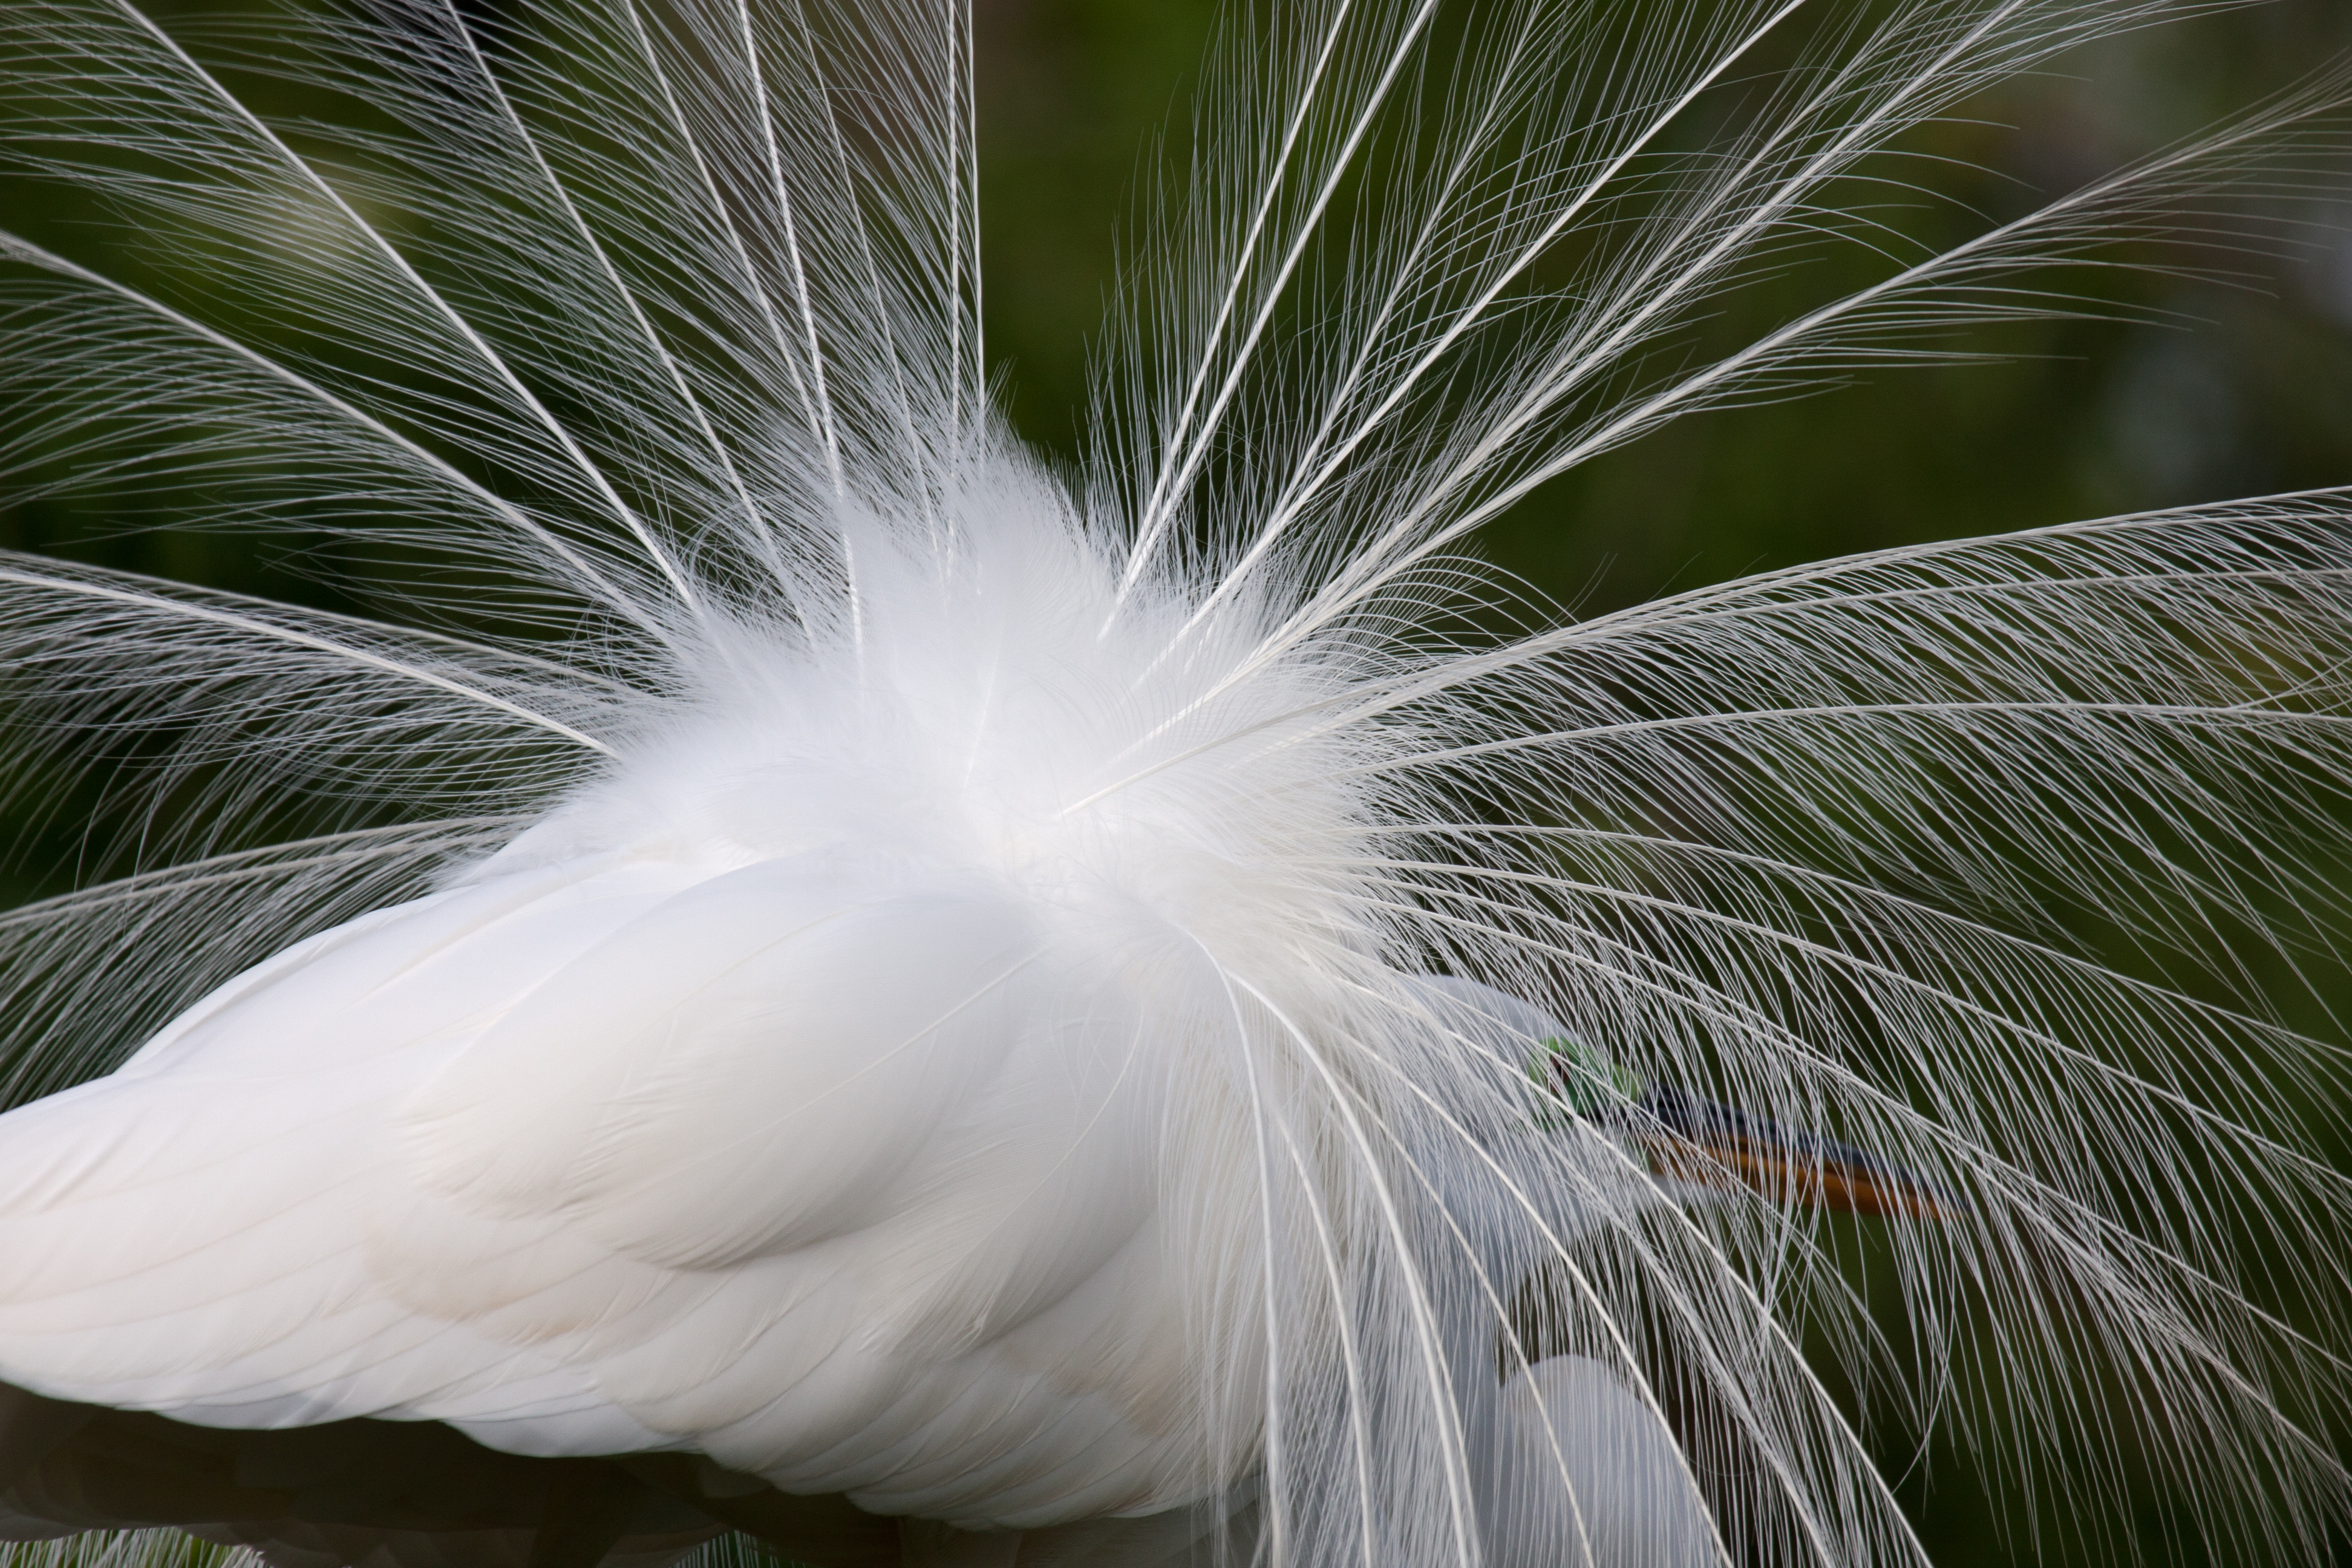 Great Egret Adult's Feather Plumes